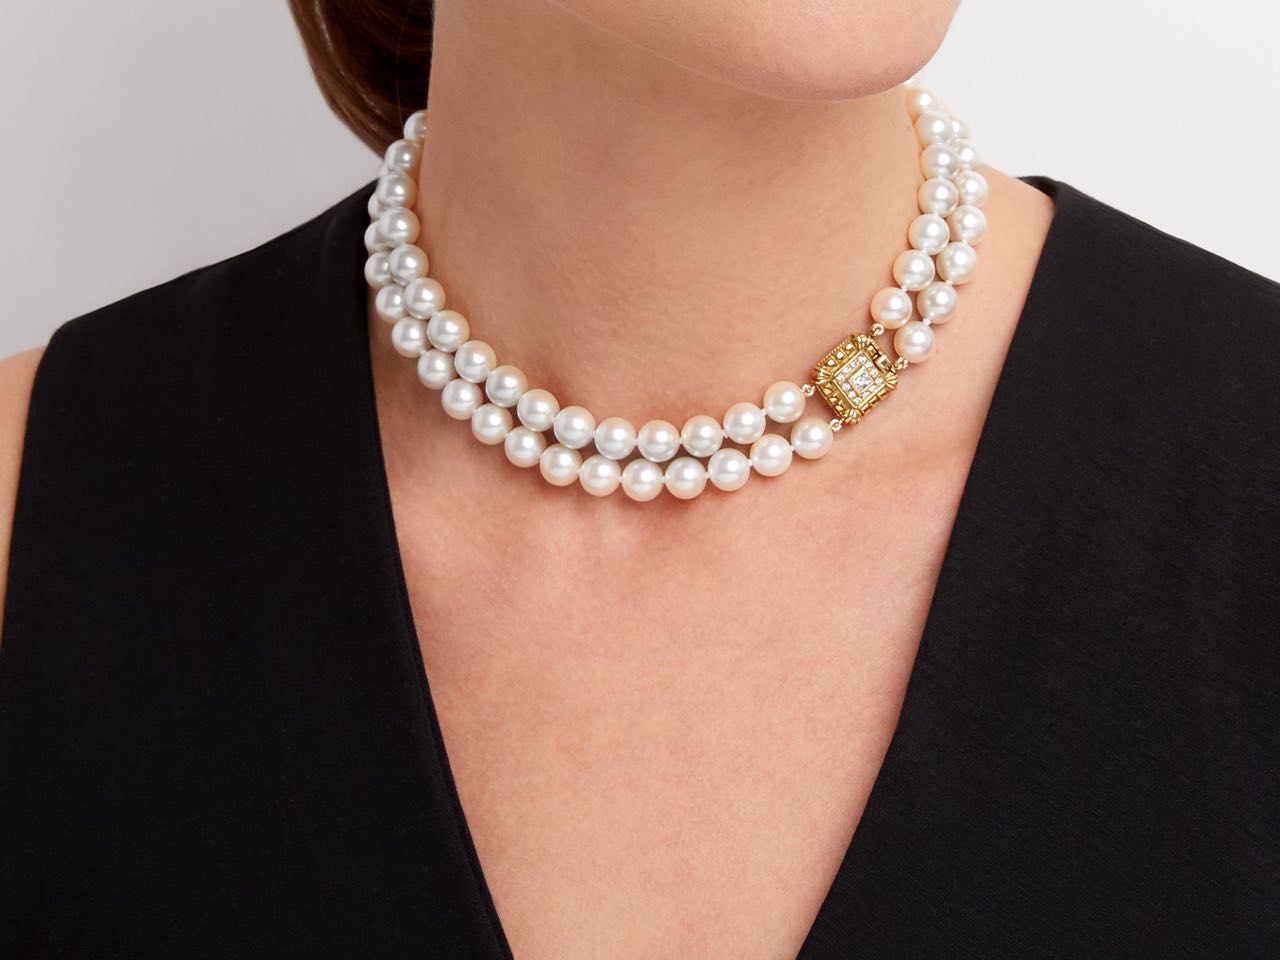 Double Strand Pearl Necklace with Diamond Clasp in 18K Gold